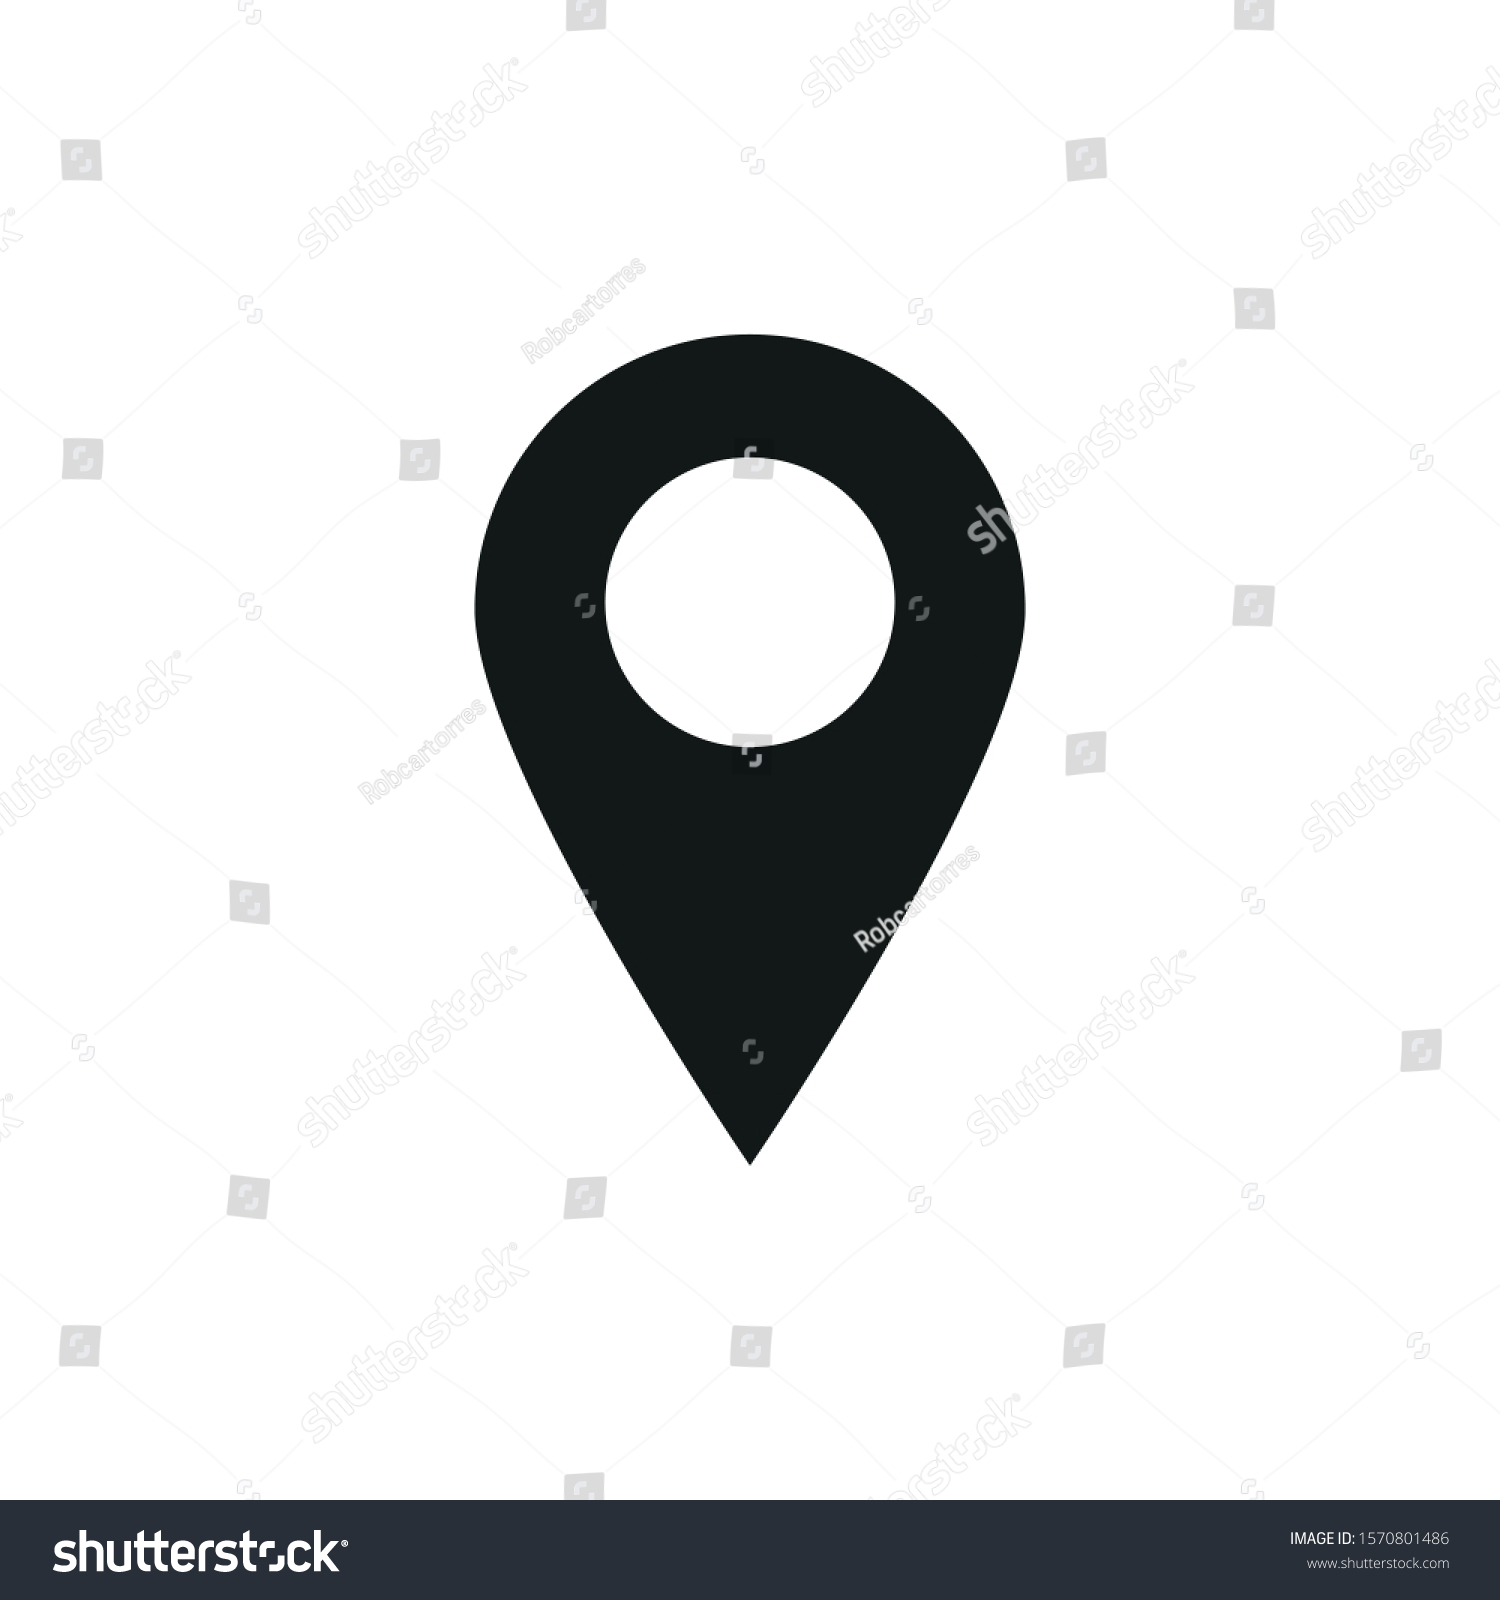 vector icon of simple forms of point of location #1570801486